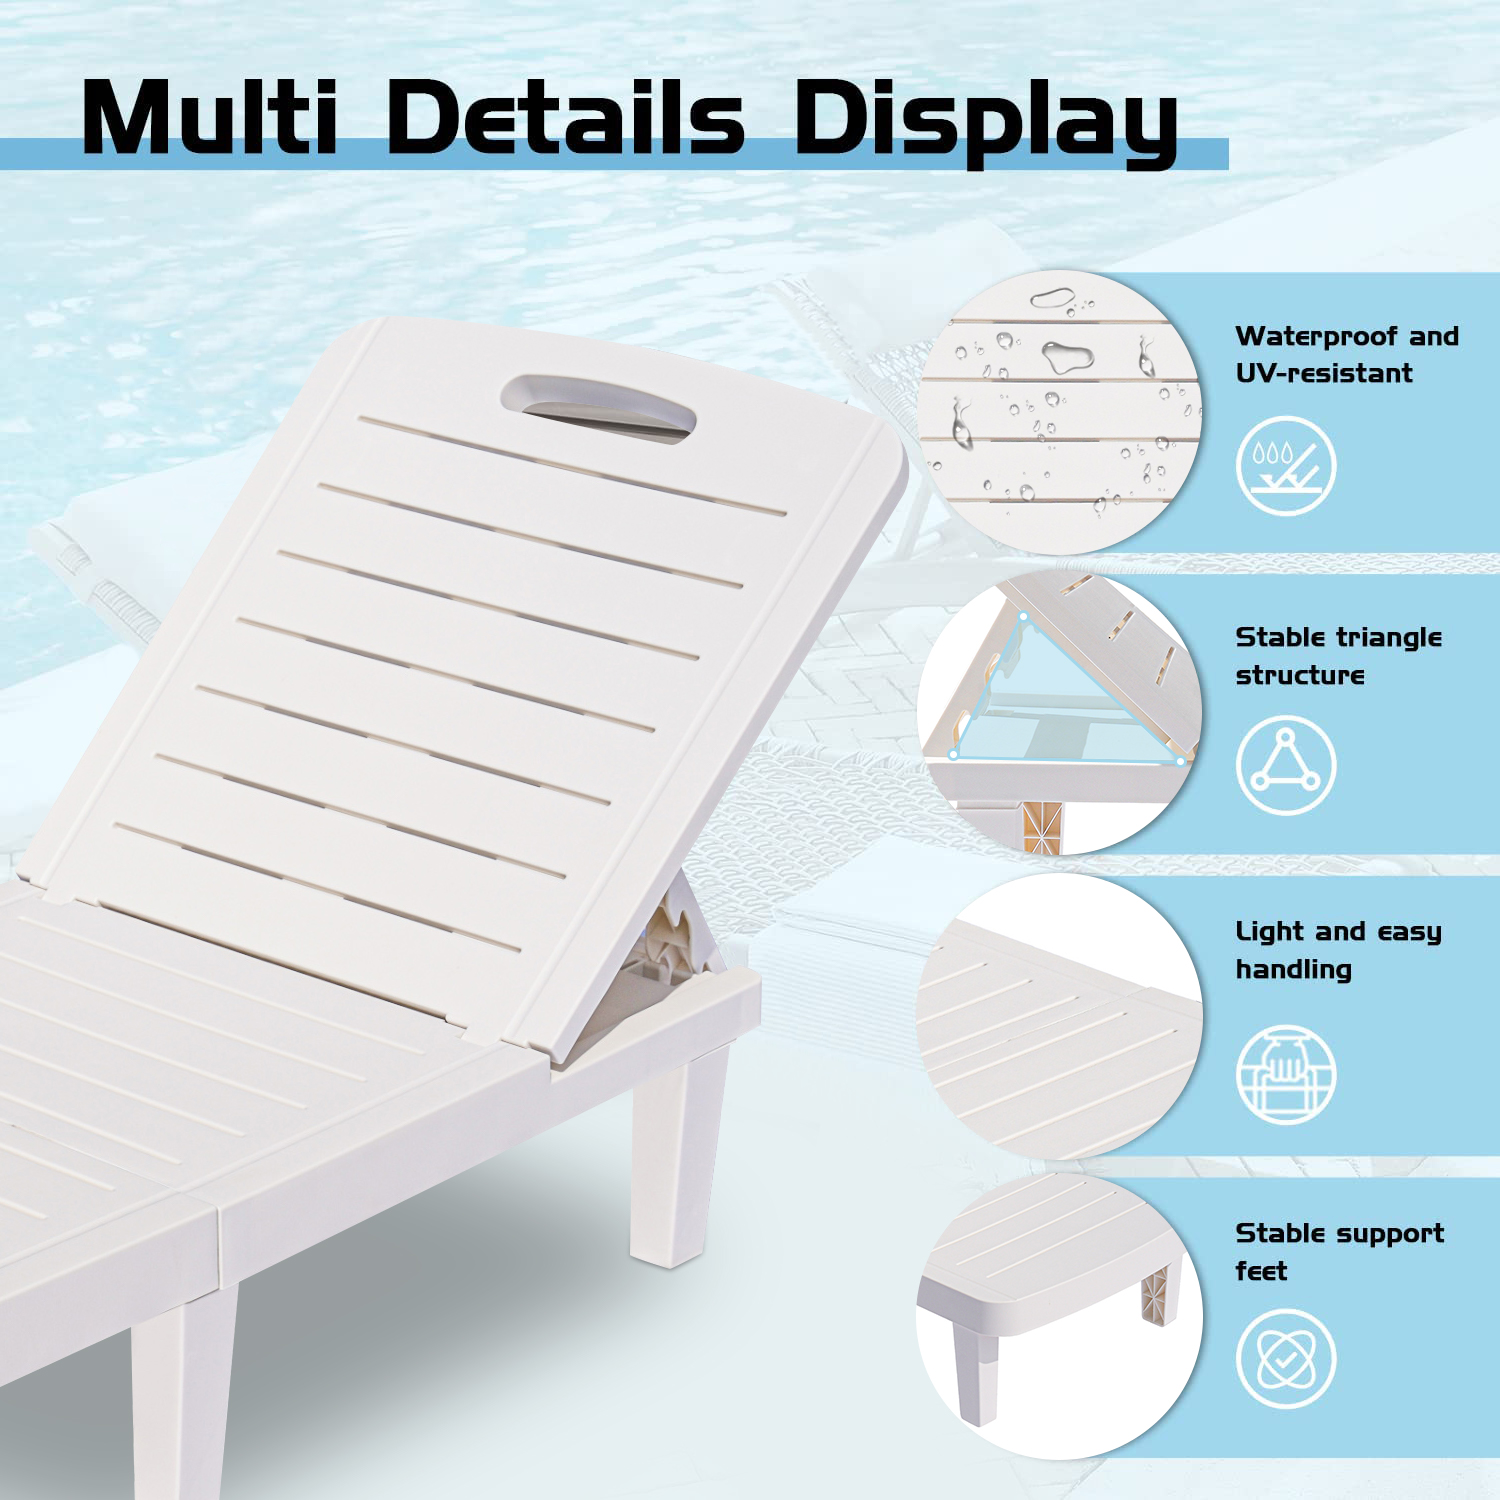 Patio Chaise Lounge, Single Chaise Lounge Chair Patio Furniture Set with Adjustable Back and Retractable Tray, All-Weather Plastic Reclining Lounge Chair for Beach, Backyard, Garden, Pool, L4554 - image 5 of 9